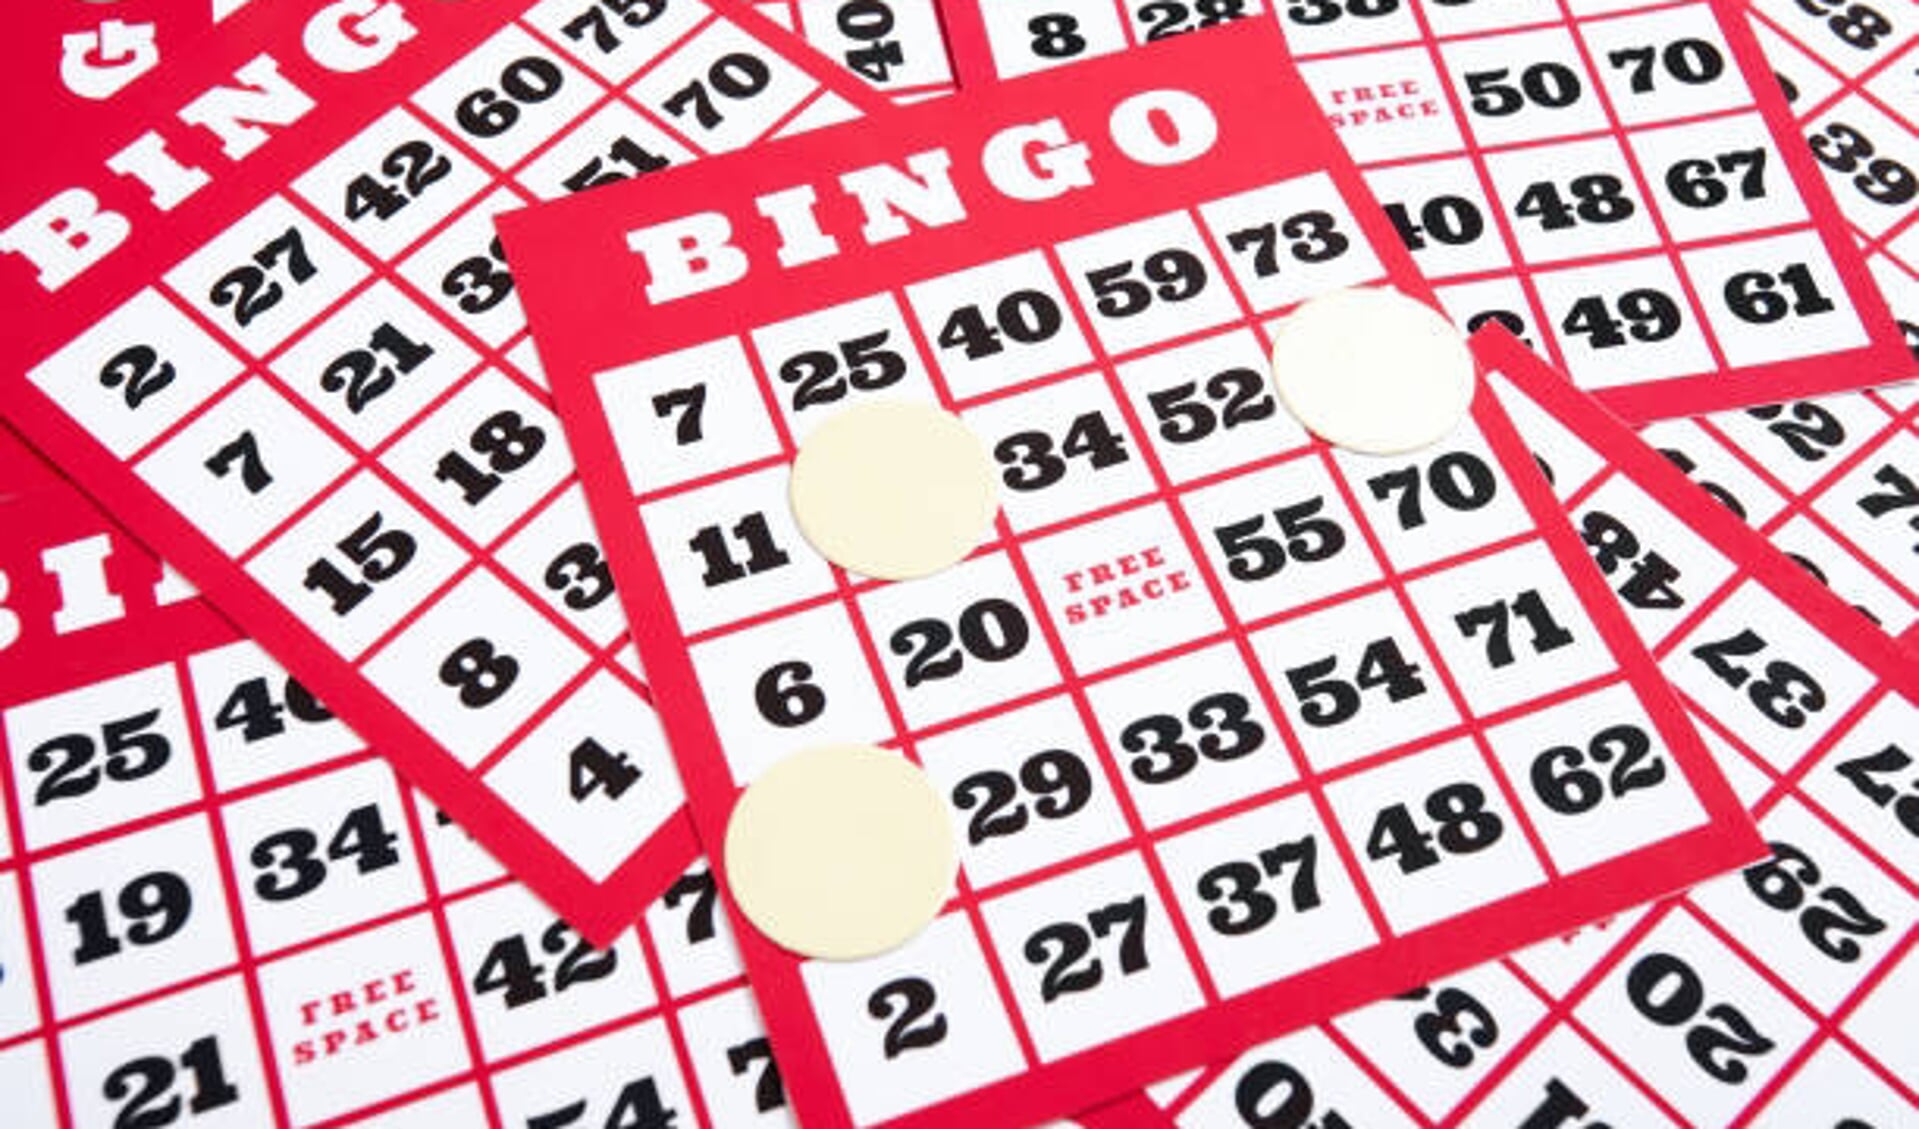 Bingo cards and numbers.